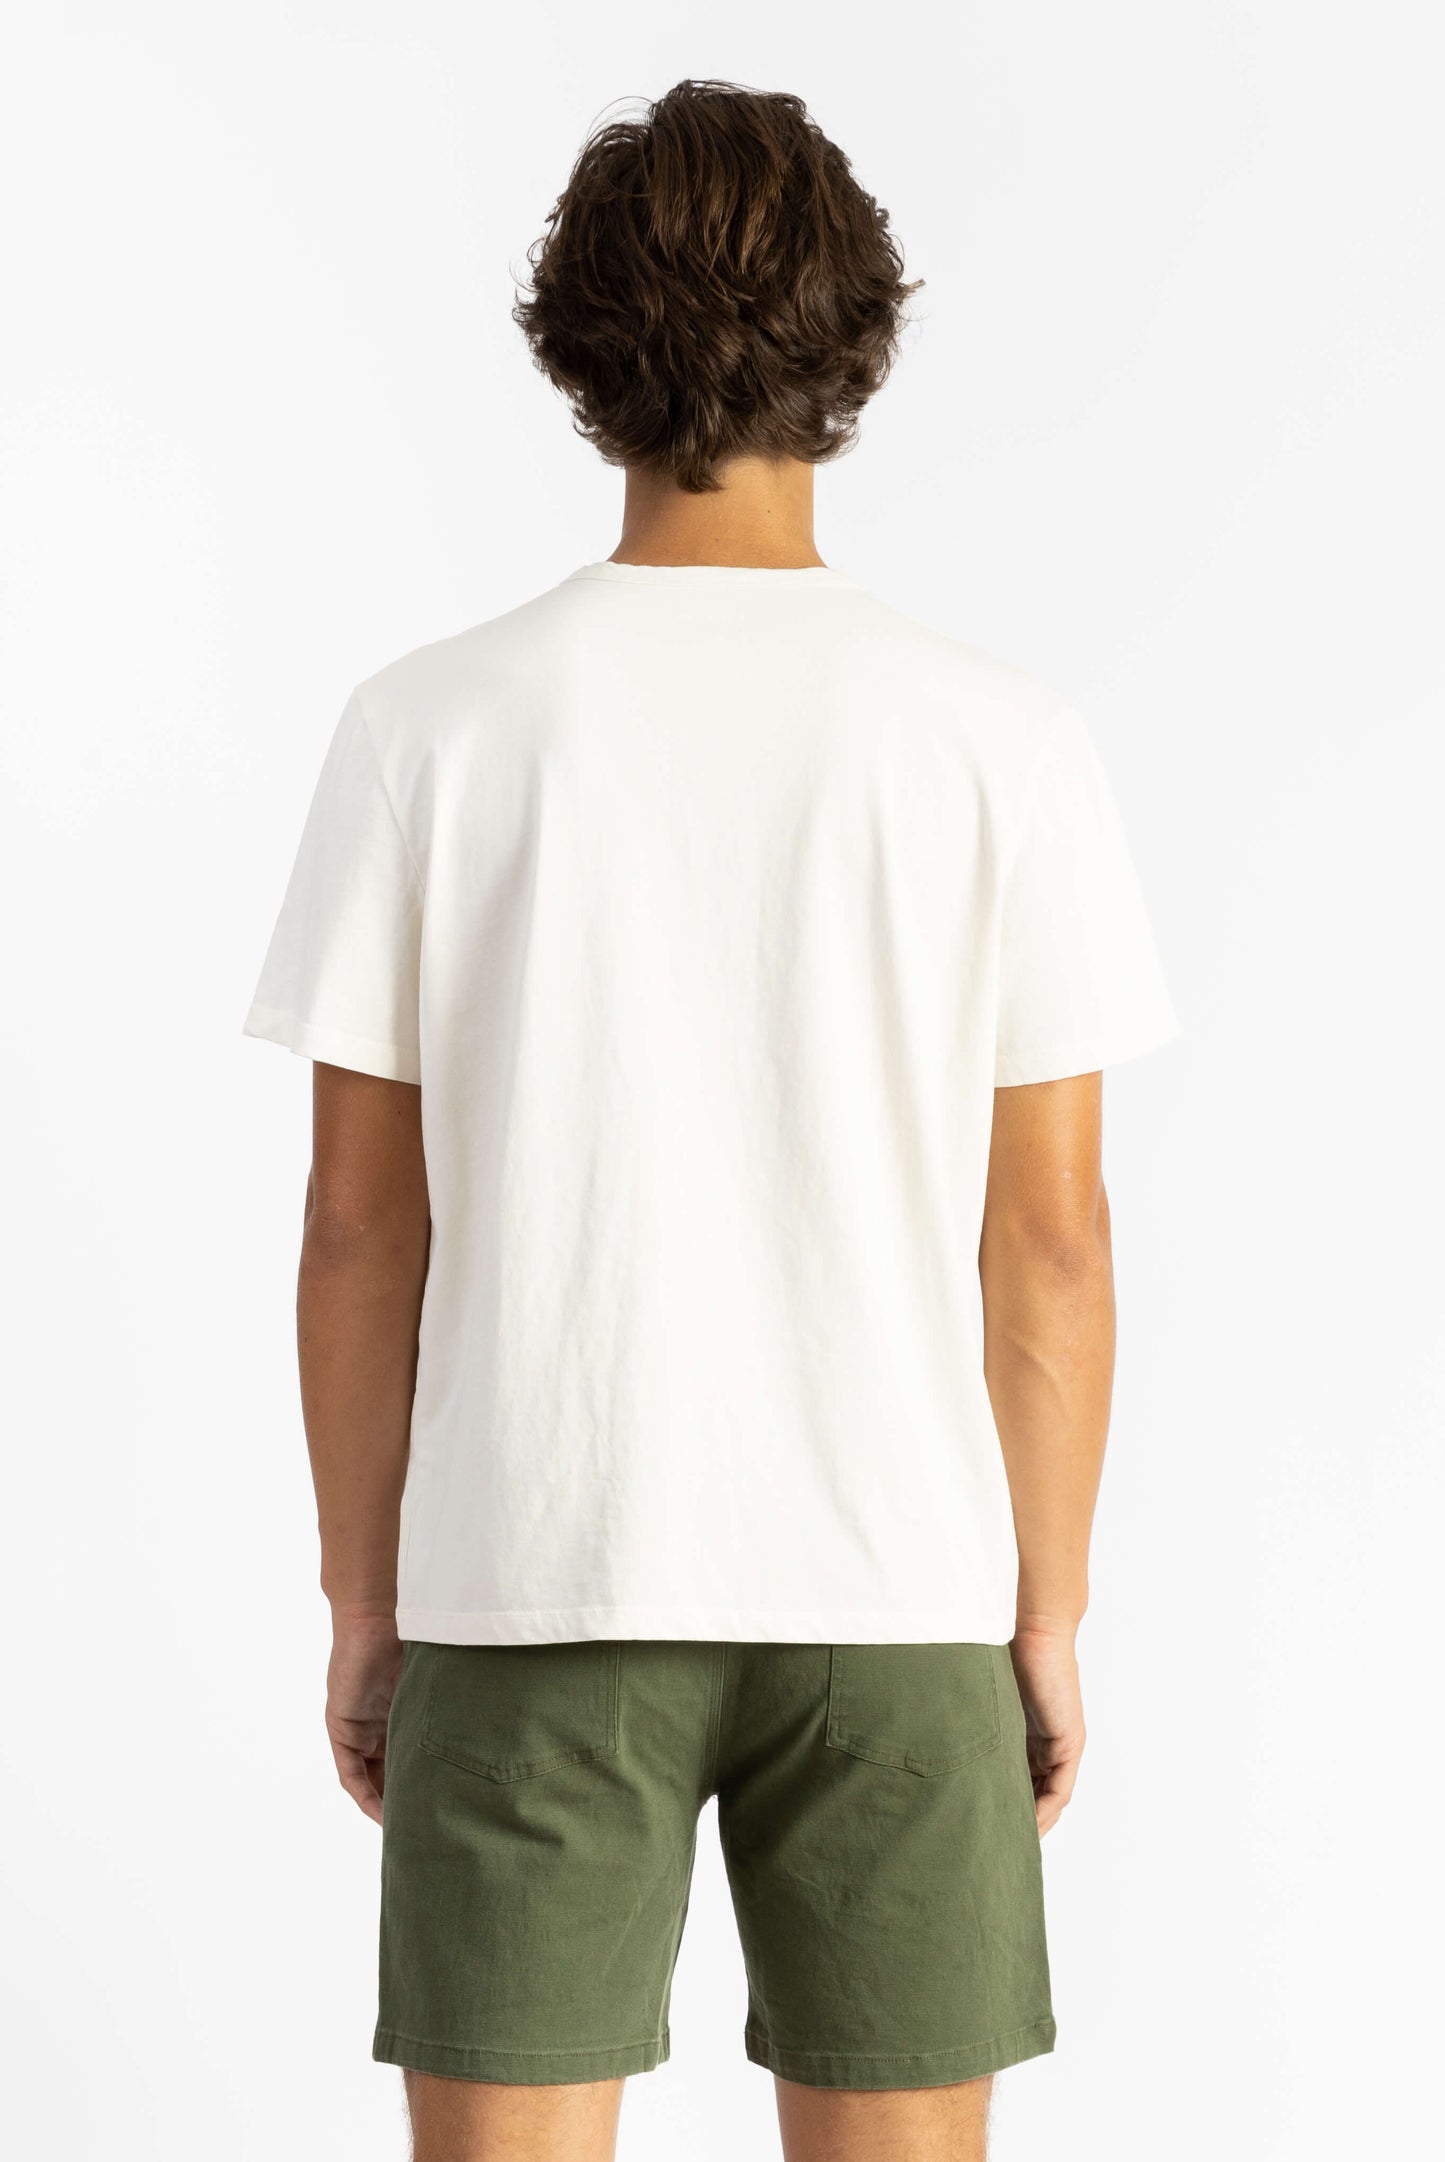 A man wearing a Off White Workshop Tee Shirt having Manana branding with green shorts